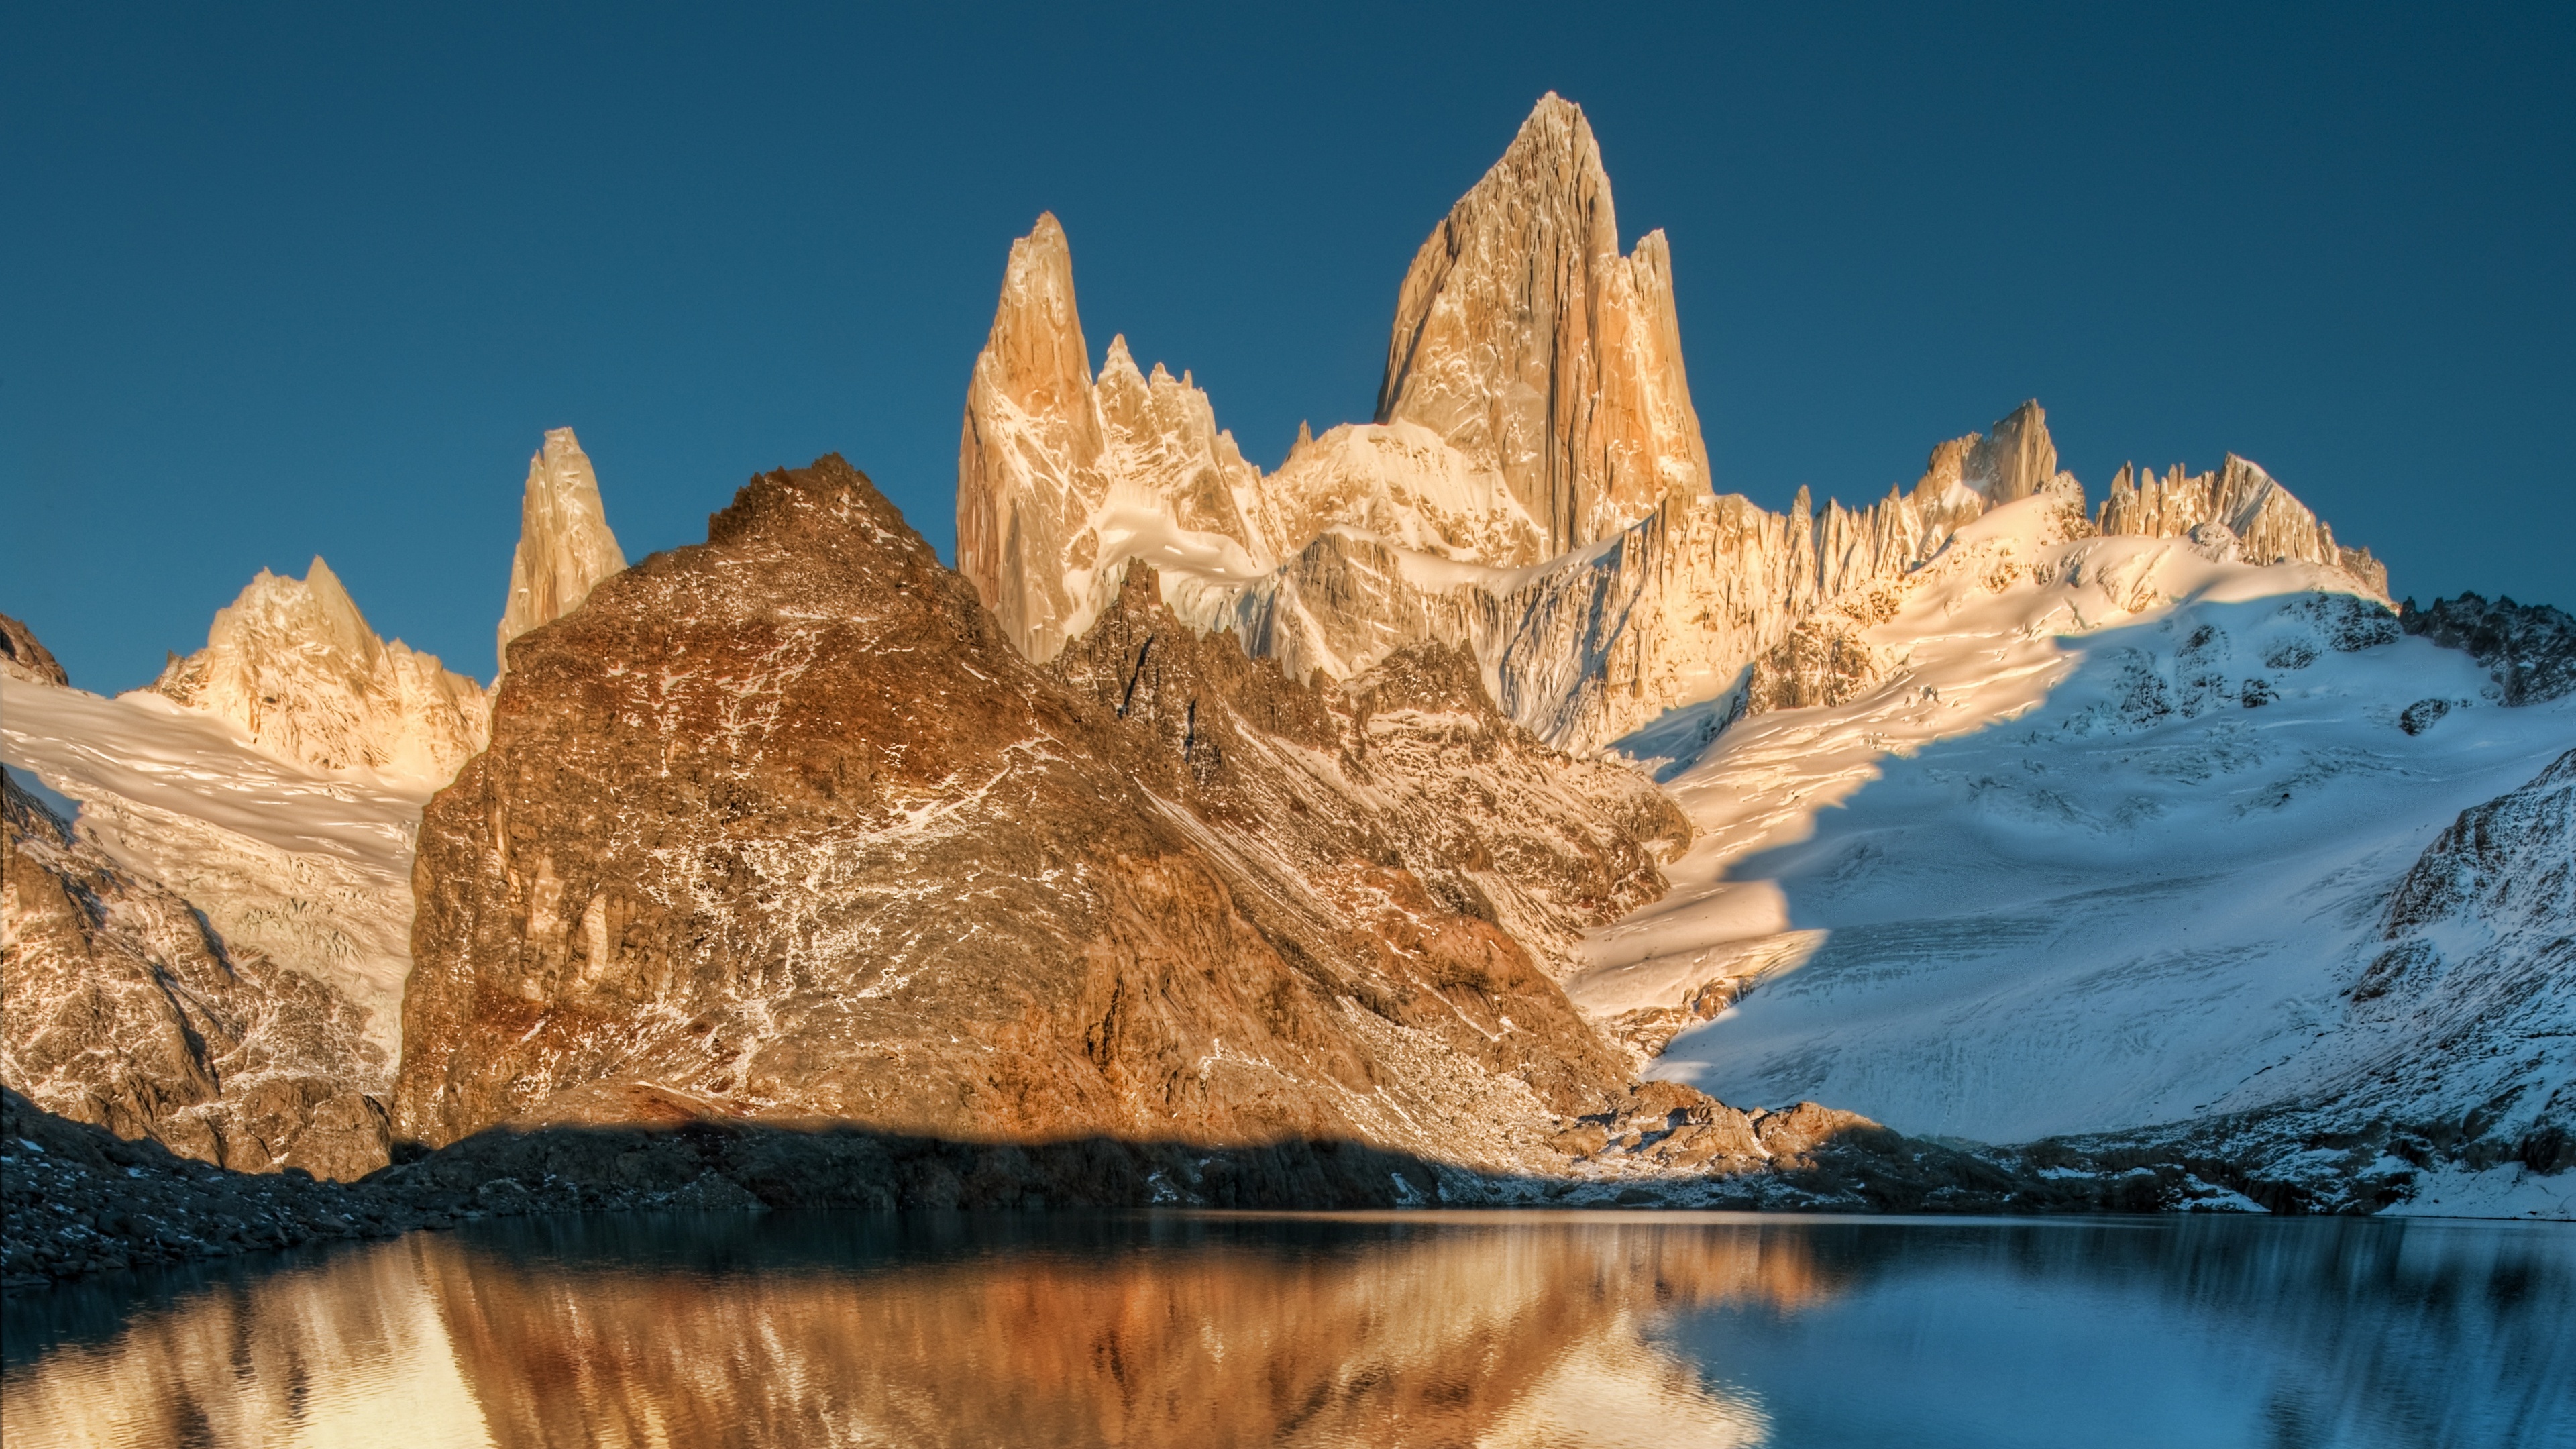 General 3840x2160 Trey Ratcliff photography mountains nature water reflection snow